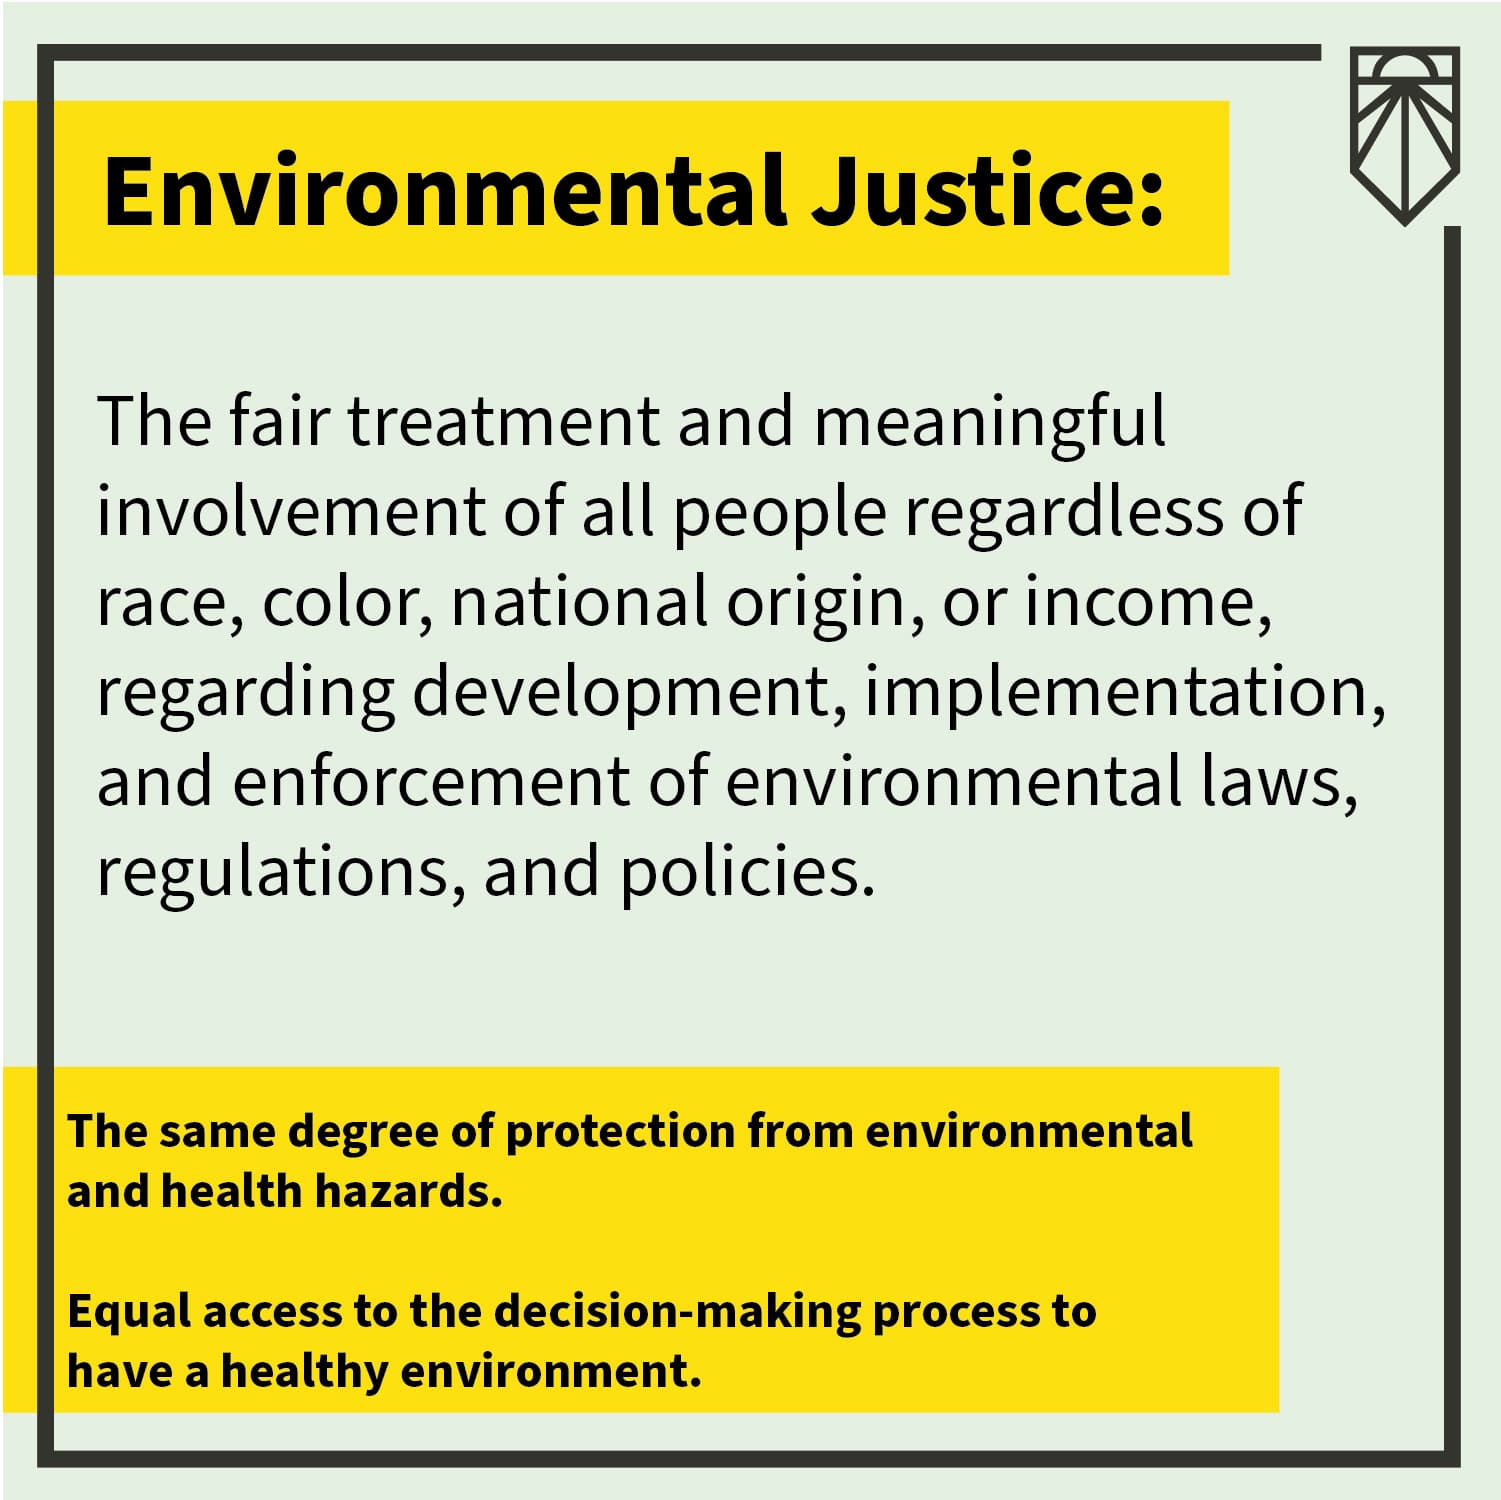 Graphic reads: The fair treatment and meaningful involvement of all people regardless of race, color, national origin, or income, regarding development, implementation, and enforcement of environmental laws, regulations, and policies. the same degree of protection from environmental and health hazards equal access to the decision-making process to have a healthy environment